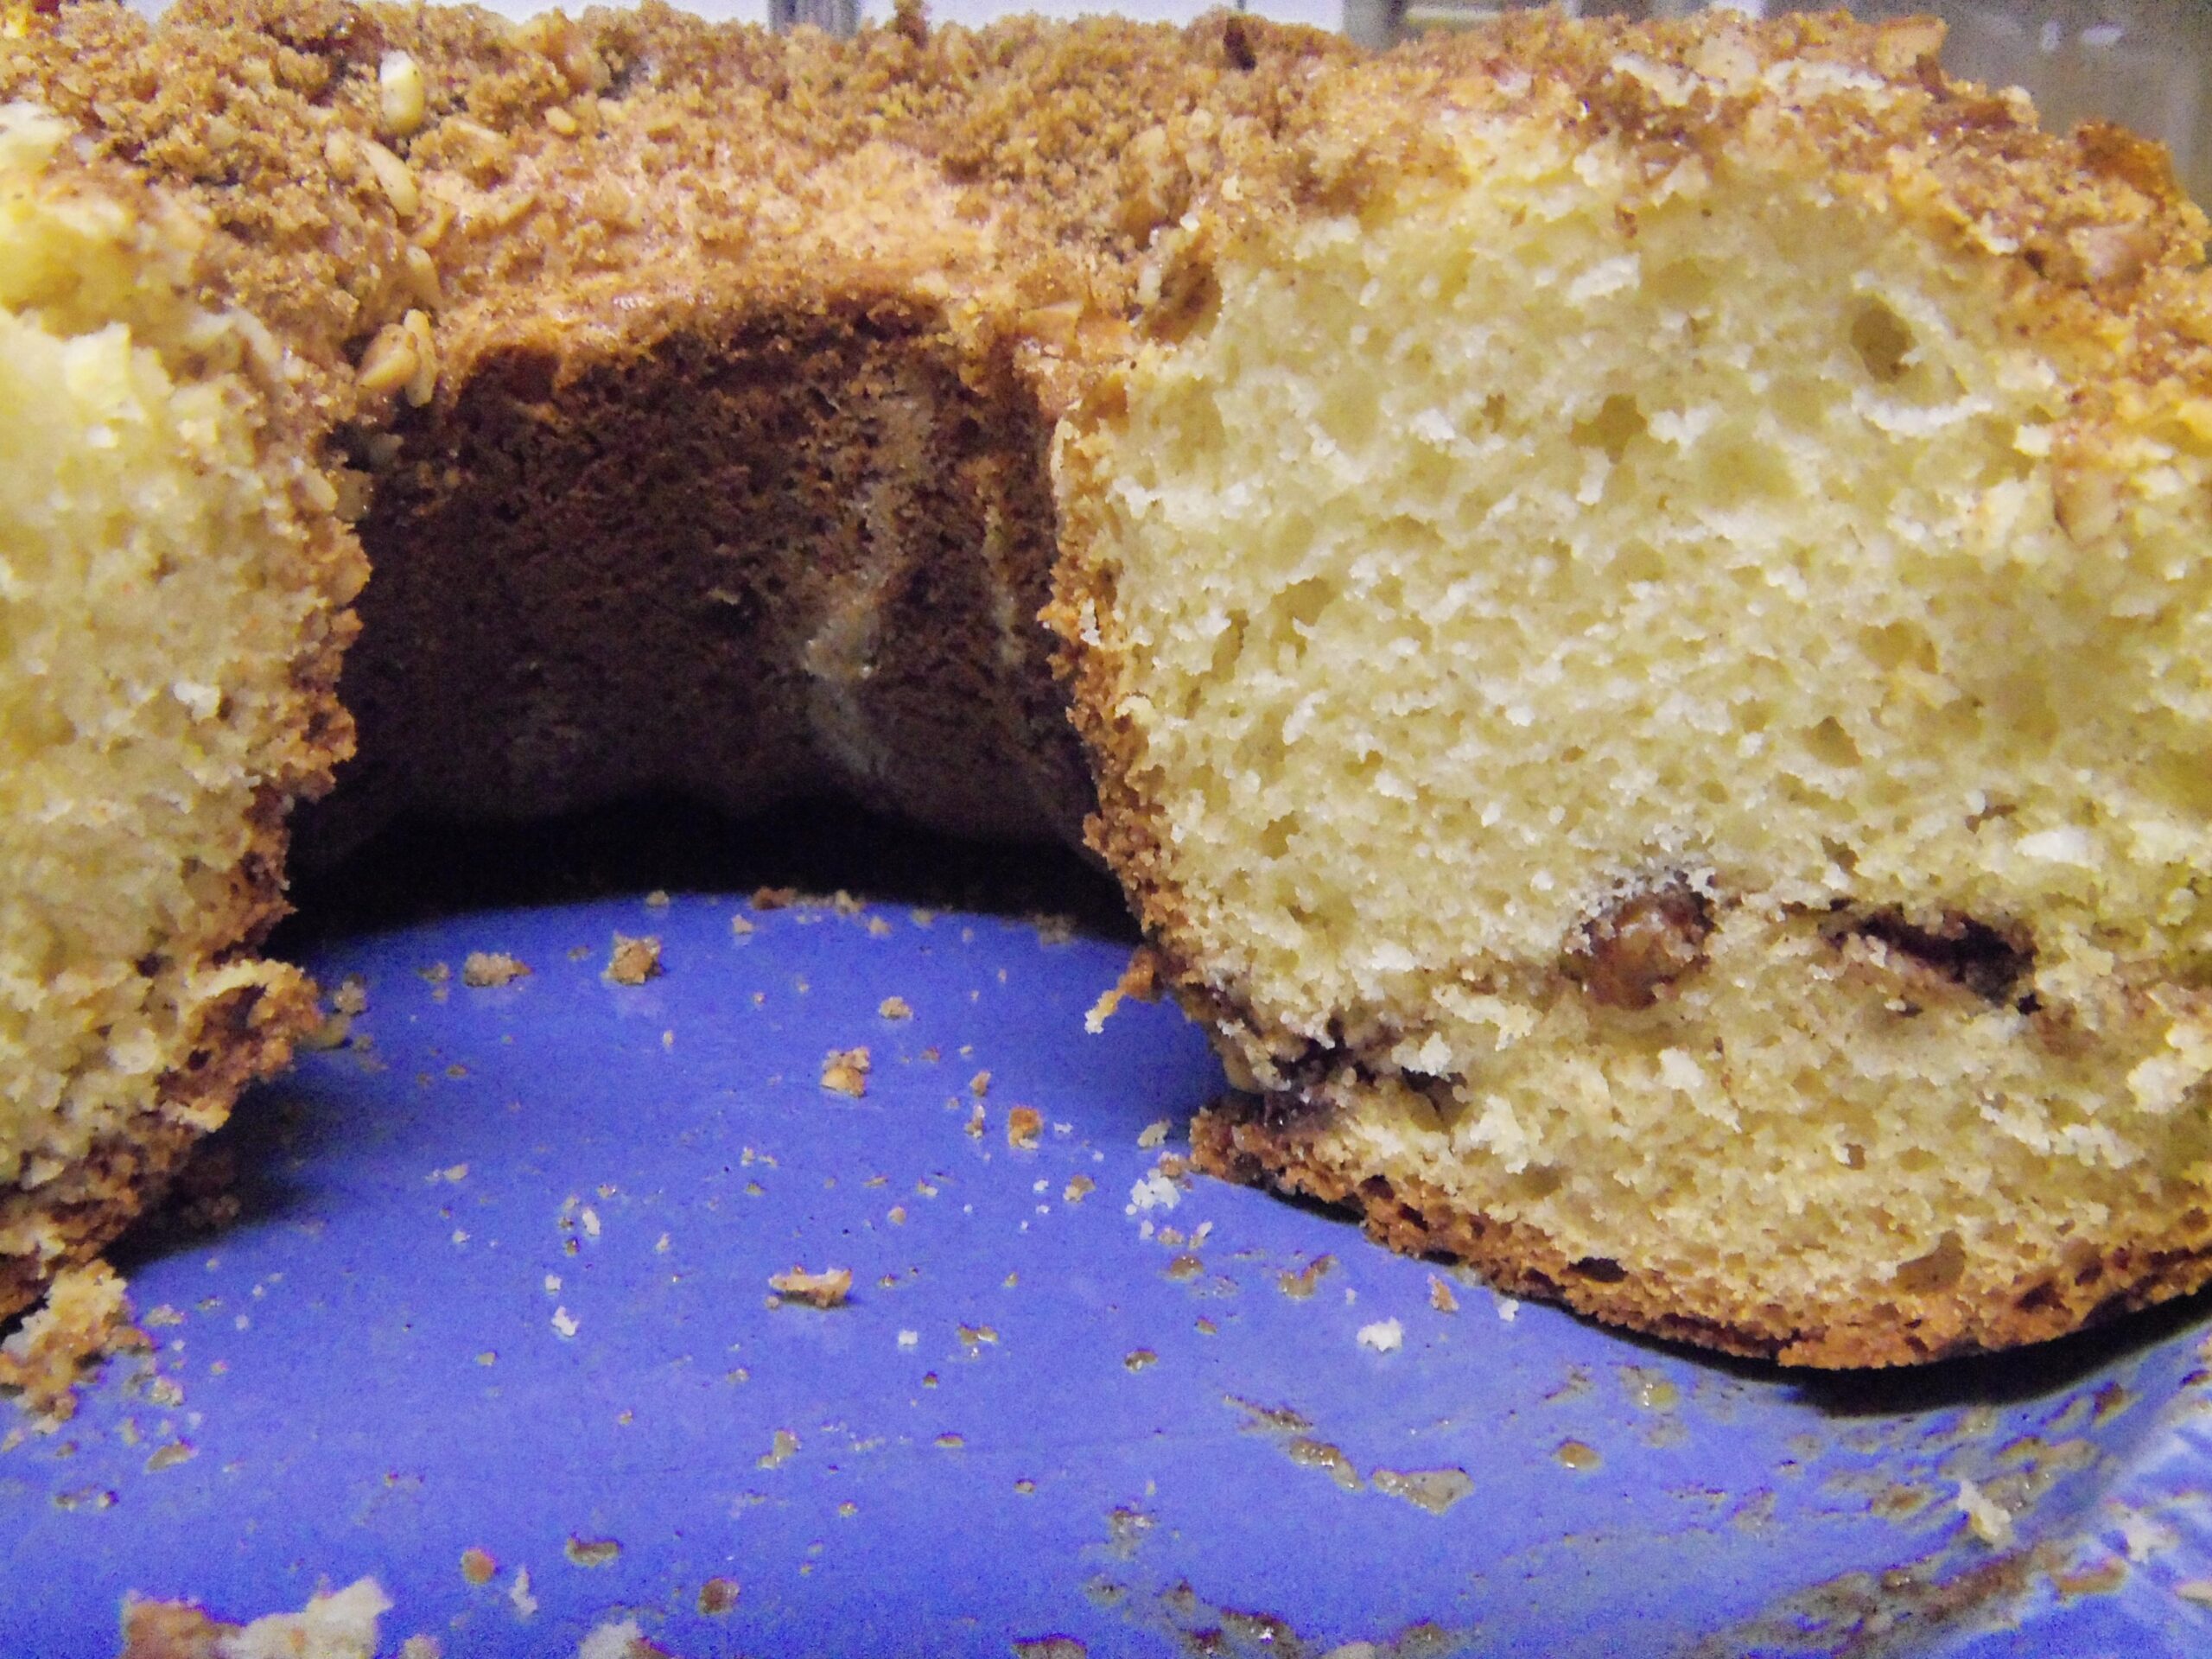  Just one bite of this coffee cake and you'll be in heaven!